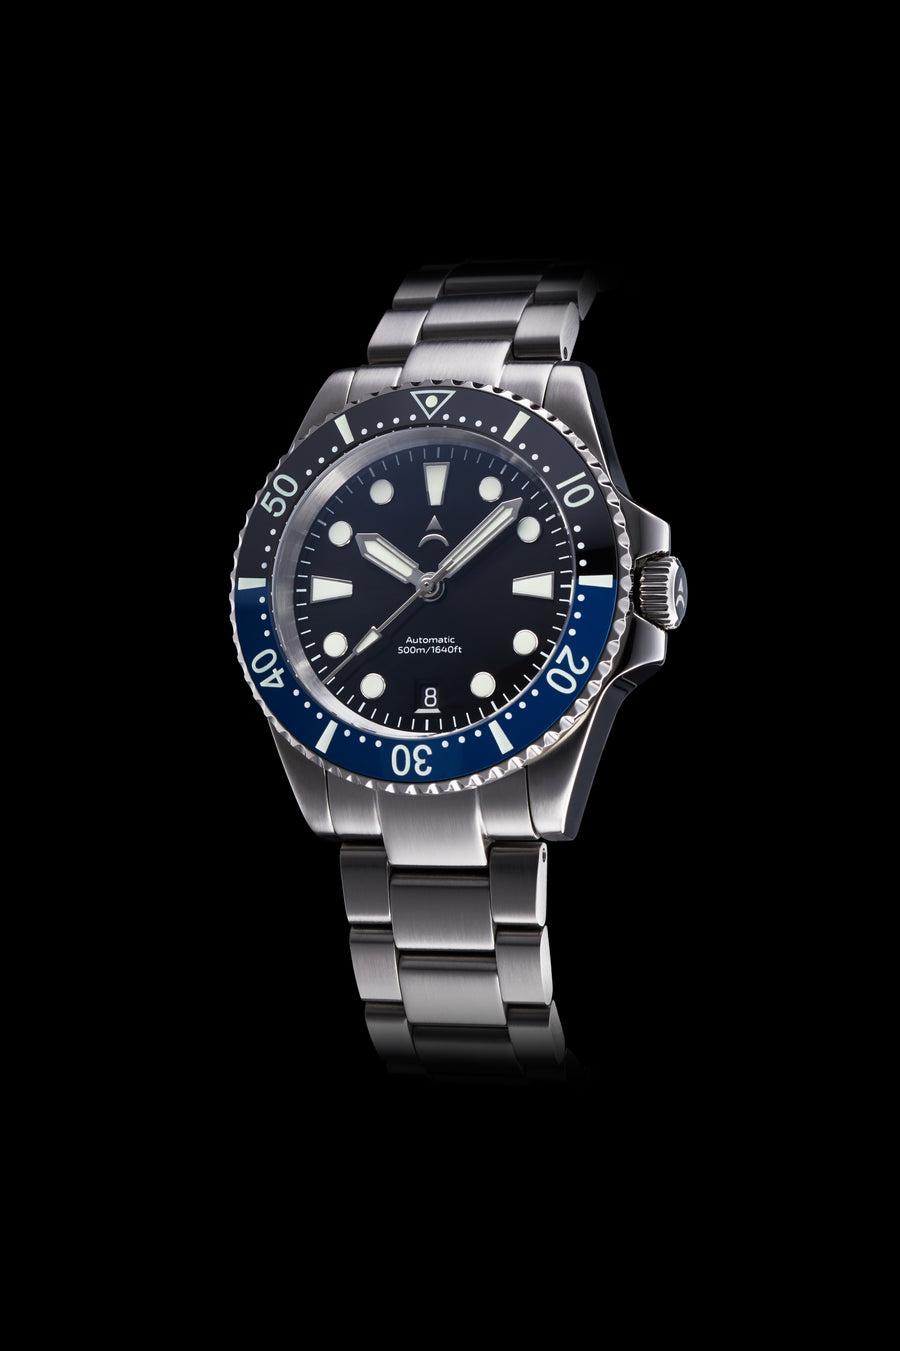 The Axios Ironclad Ocean Gulf features a blue-black ceramic bezel with a black sunburst dial and finished with double domed Sapphire crystal glass.